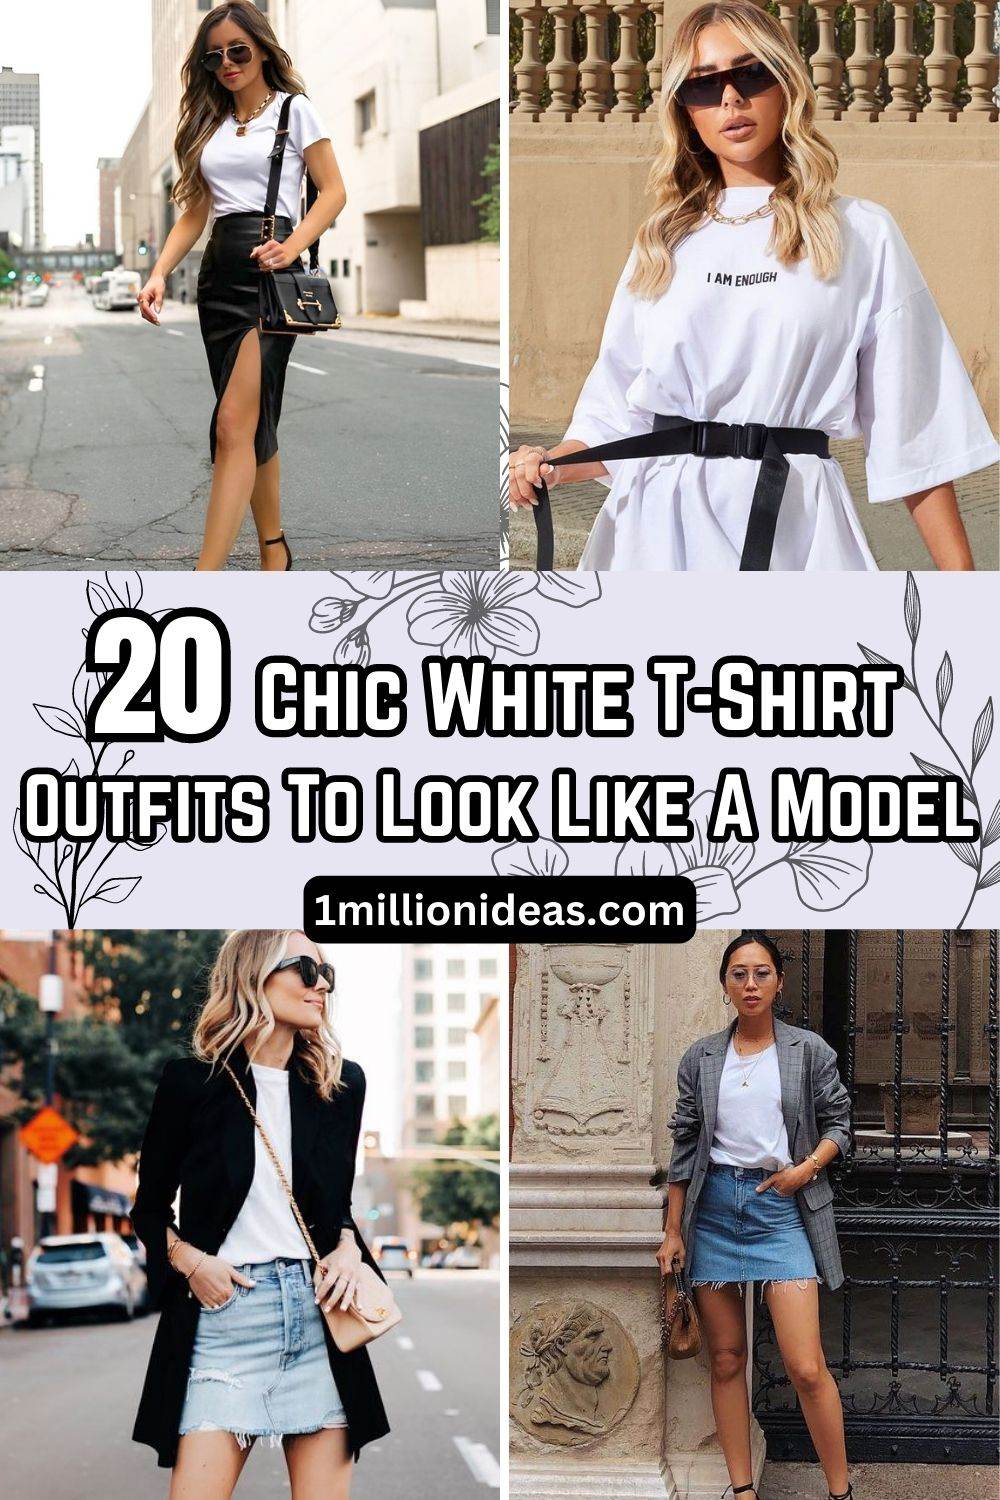 20 Chic White T-Shirt Outfits To Look Like A Model